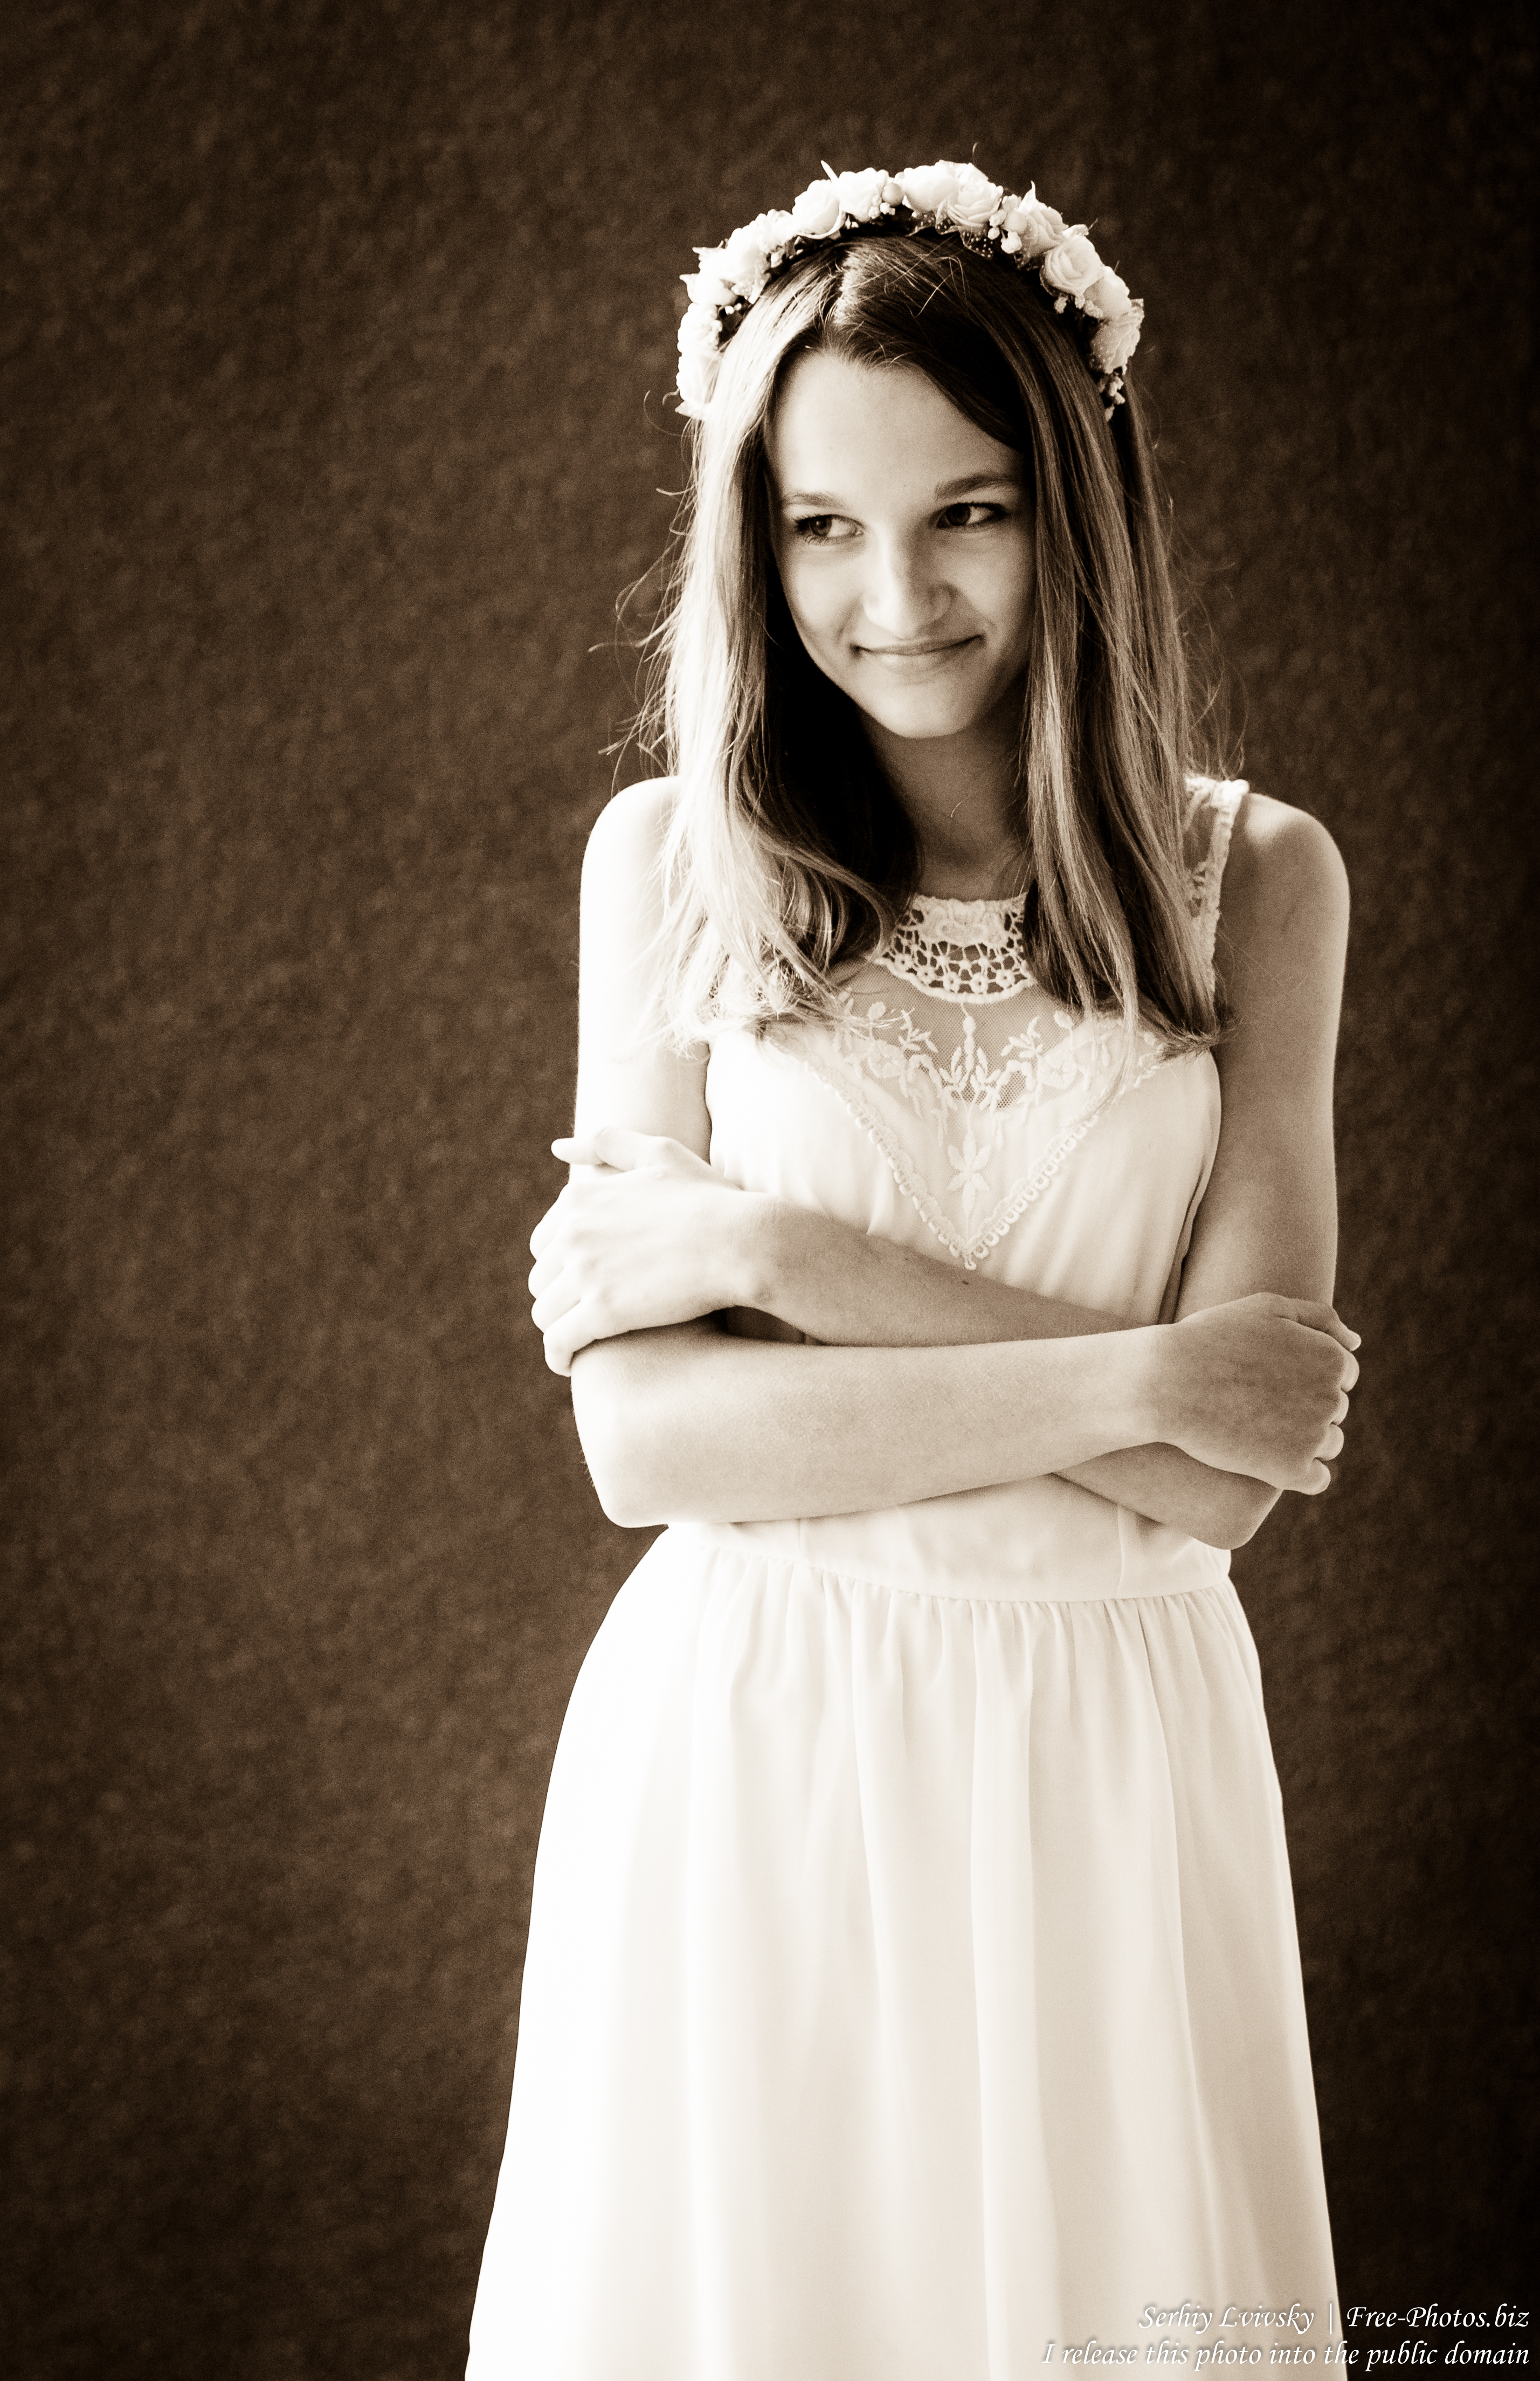 a 13-year-old Catholic girl in a white dress photographed in June 2015, picture 10